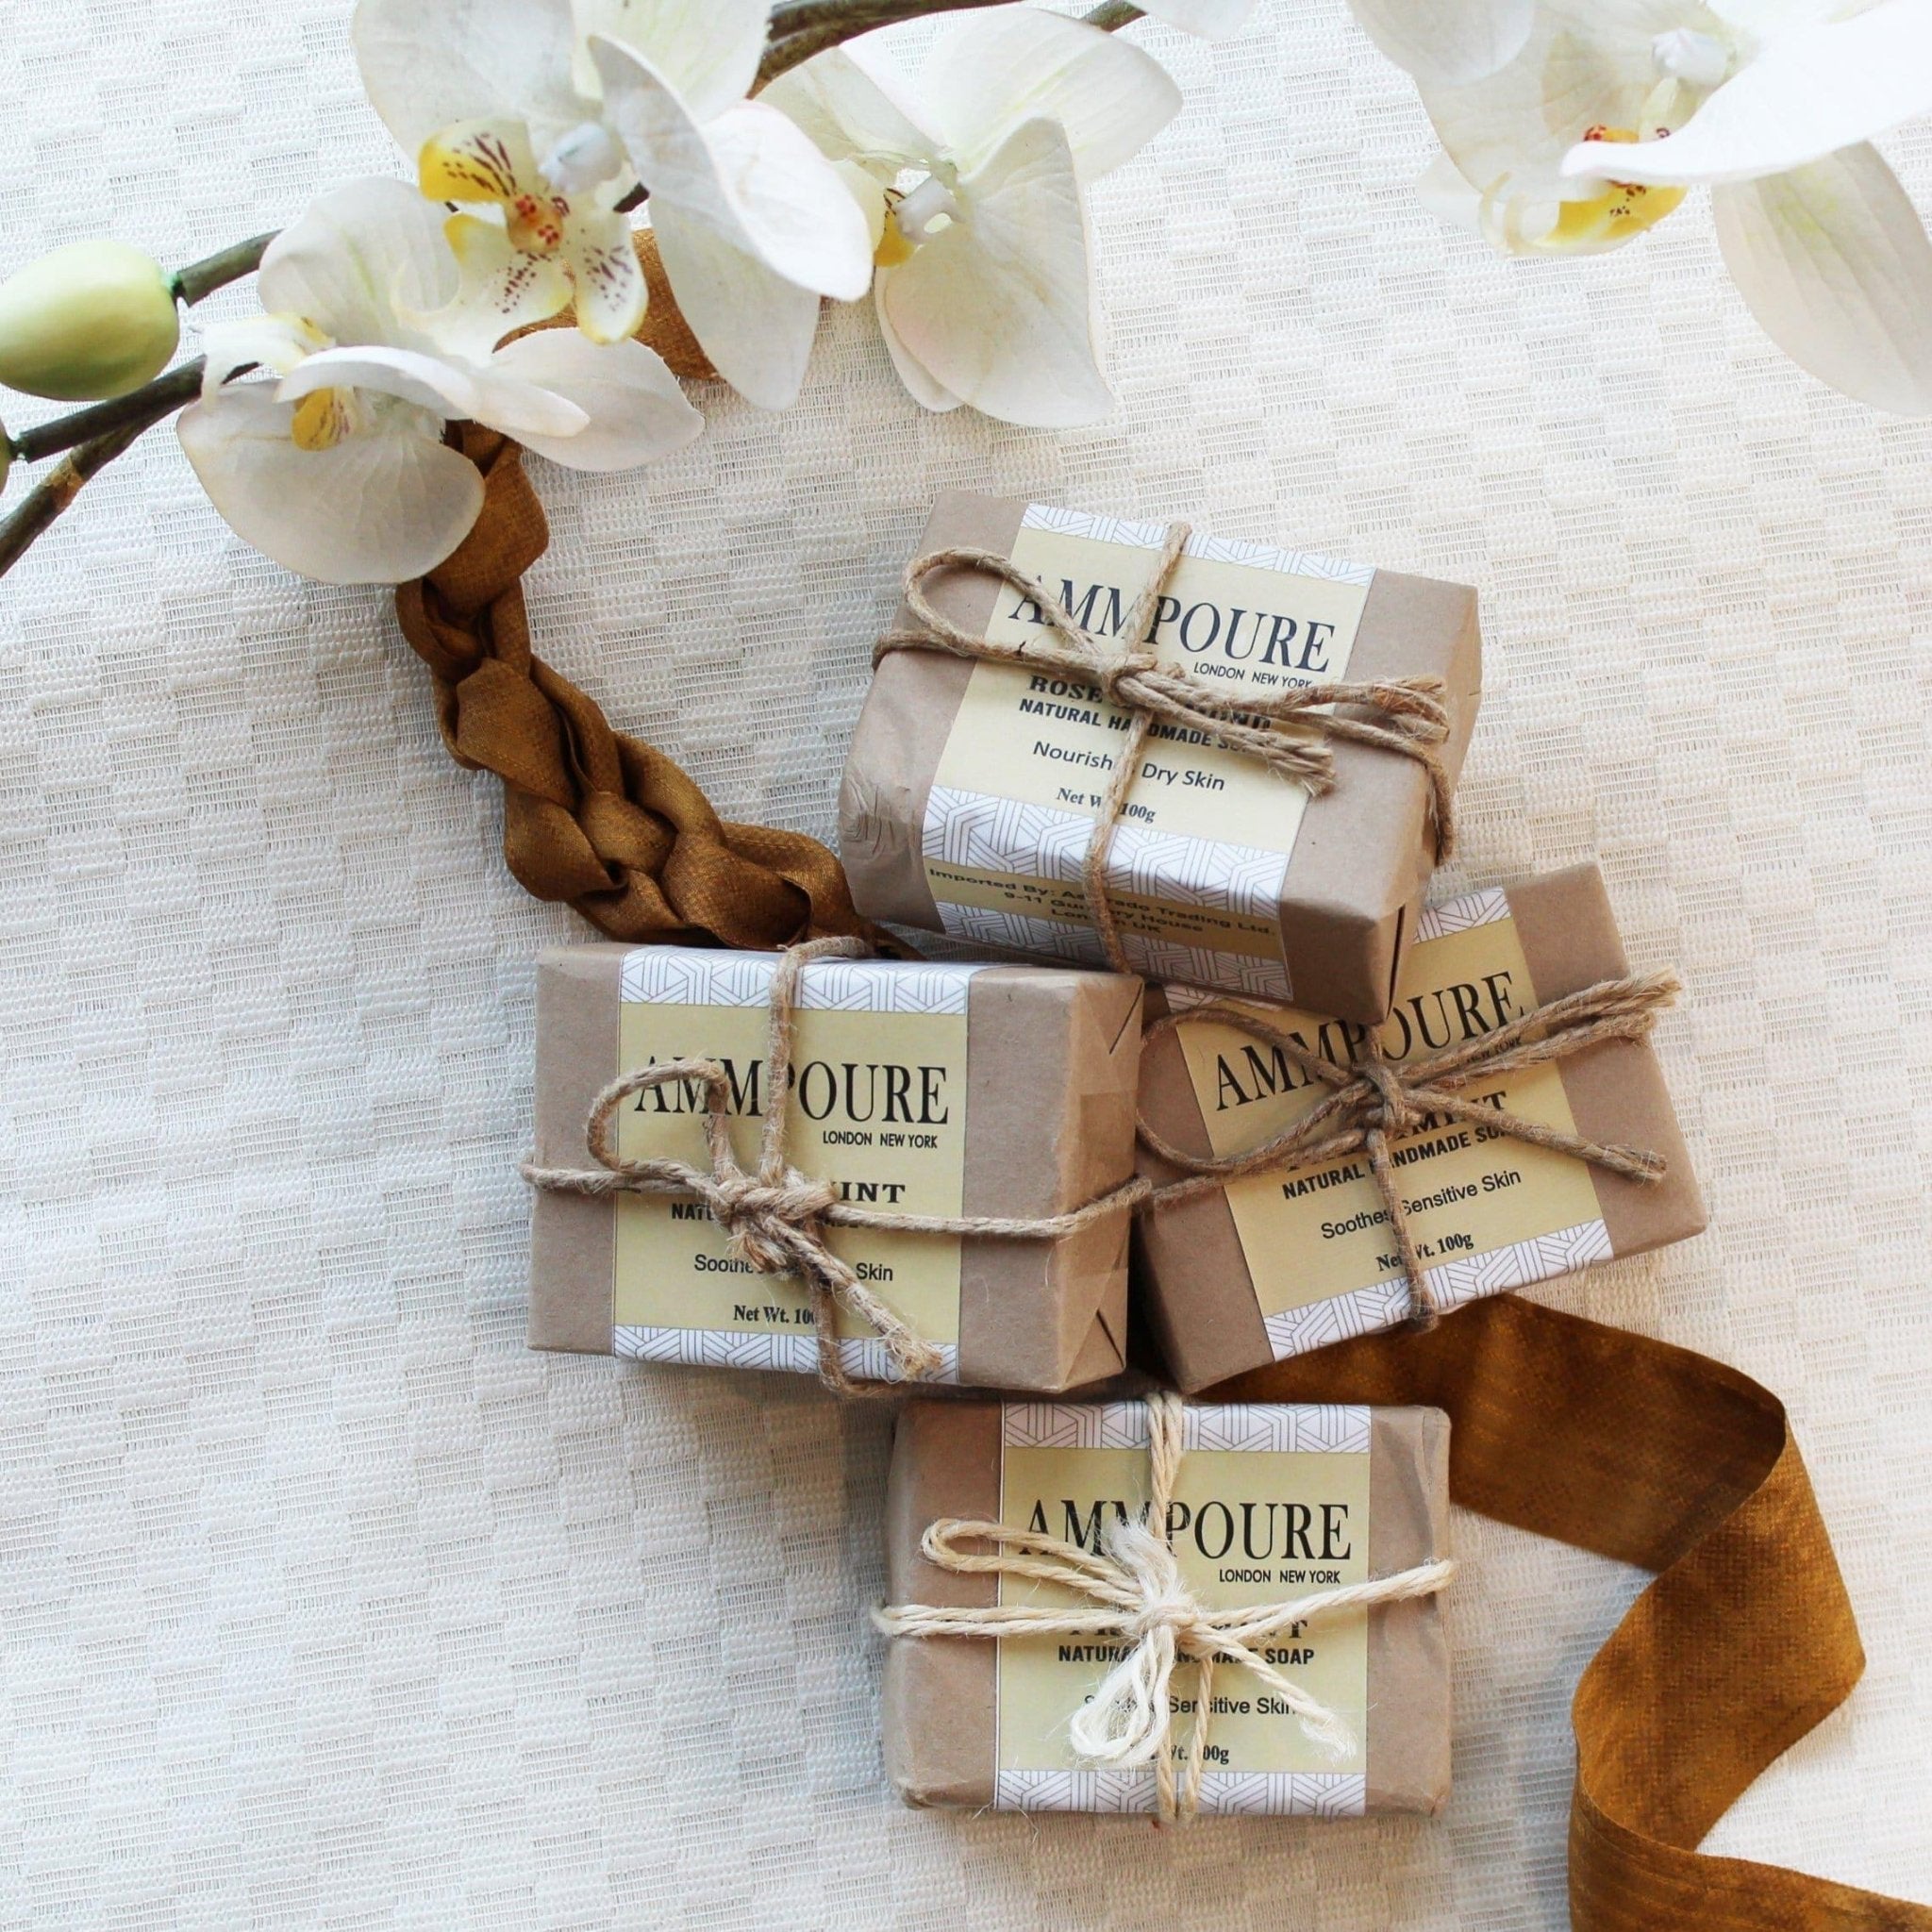 Natural Organic Soaps Set Of 4 - Ammpoure Wellbeing